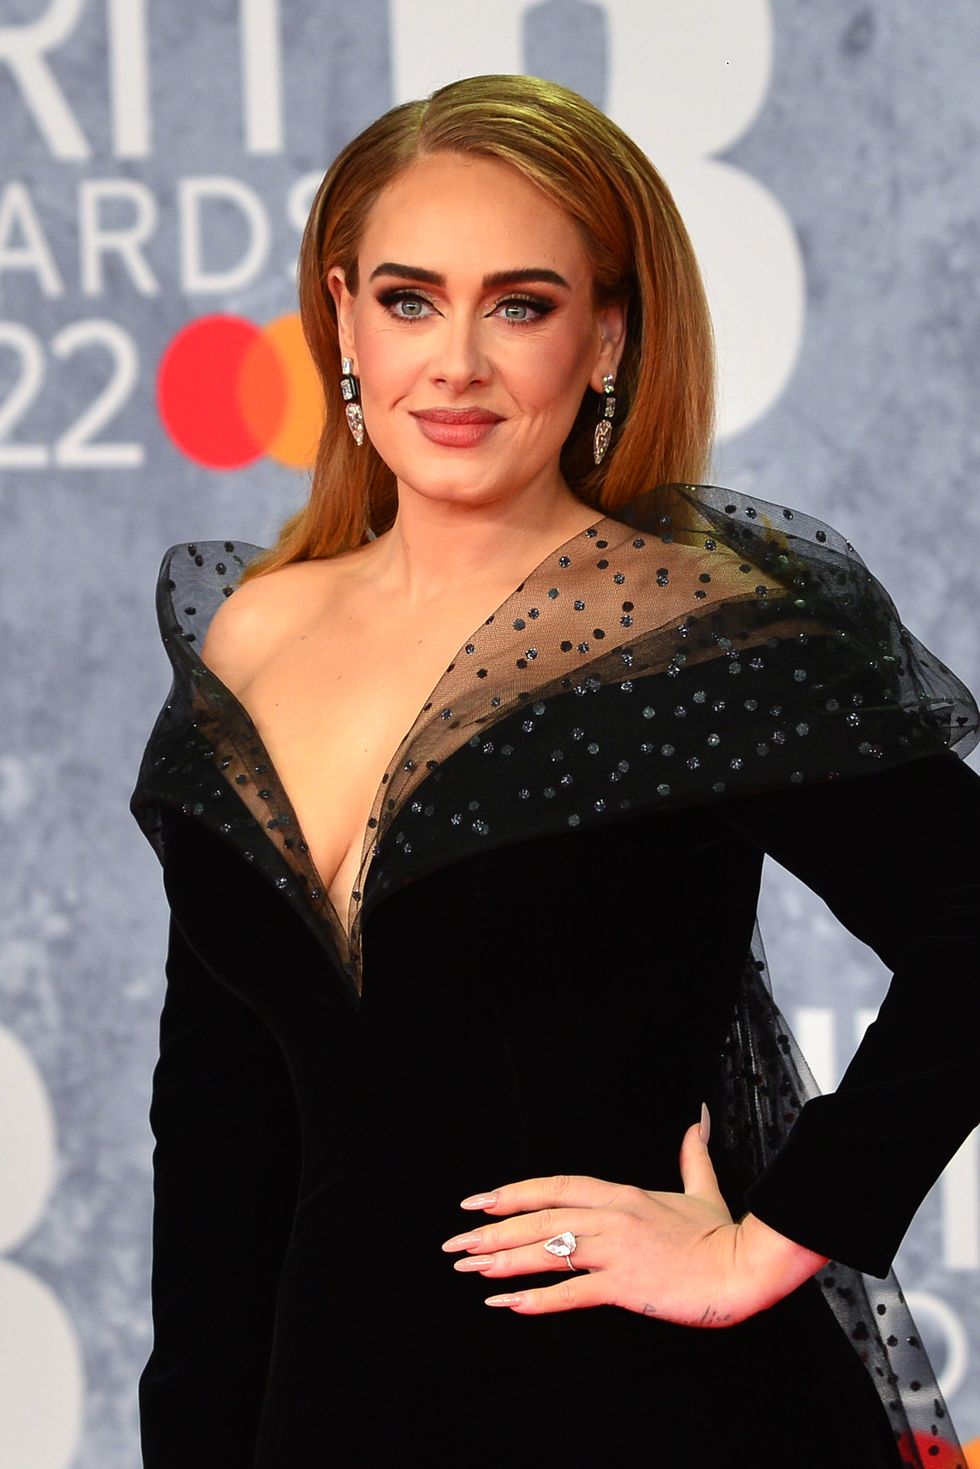 adele at the brit awards 2022 showing off her ring